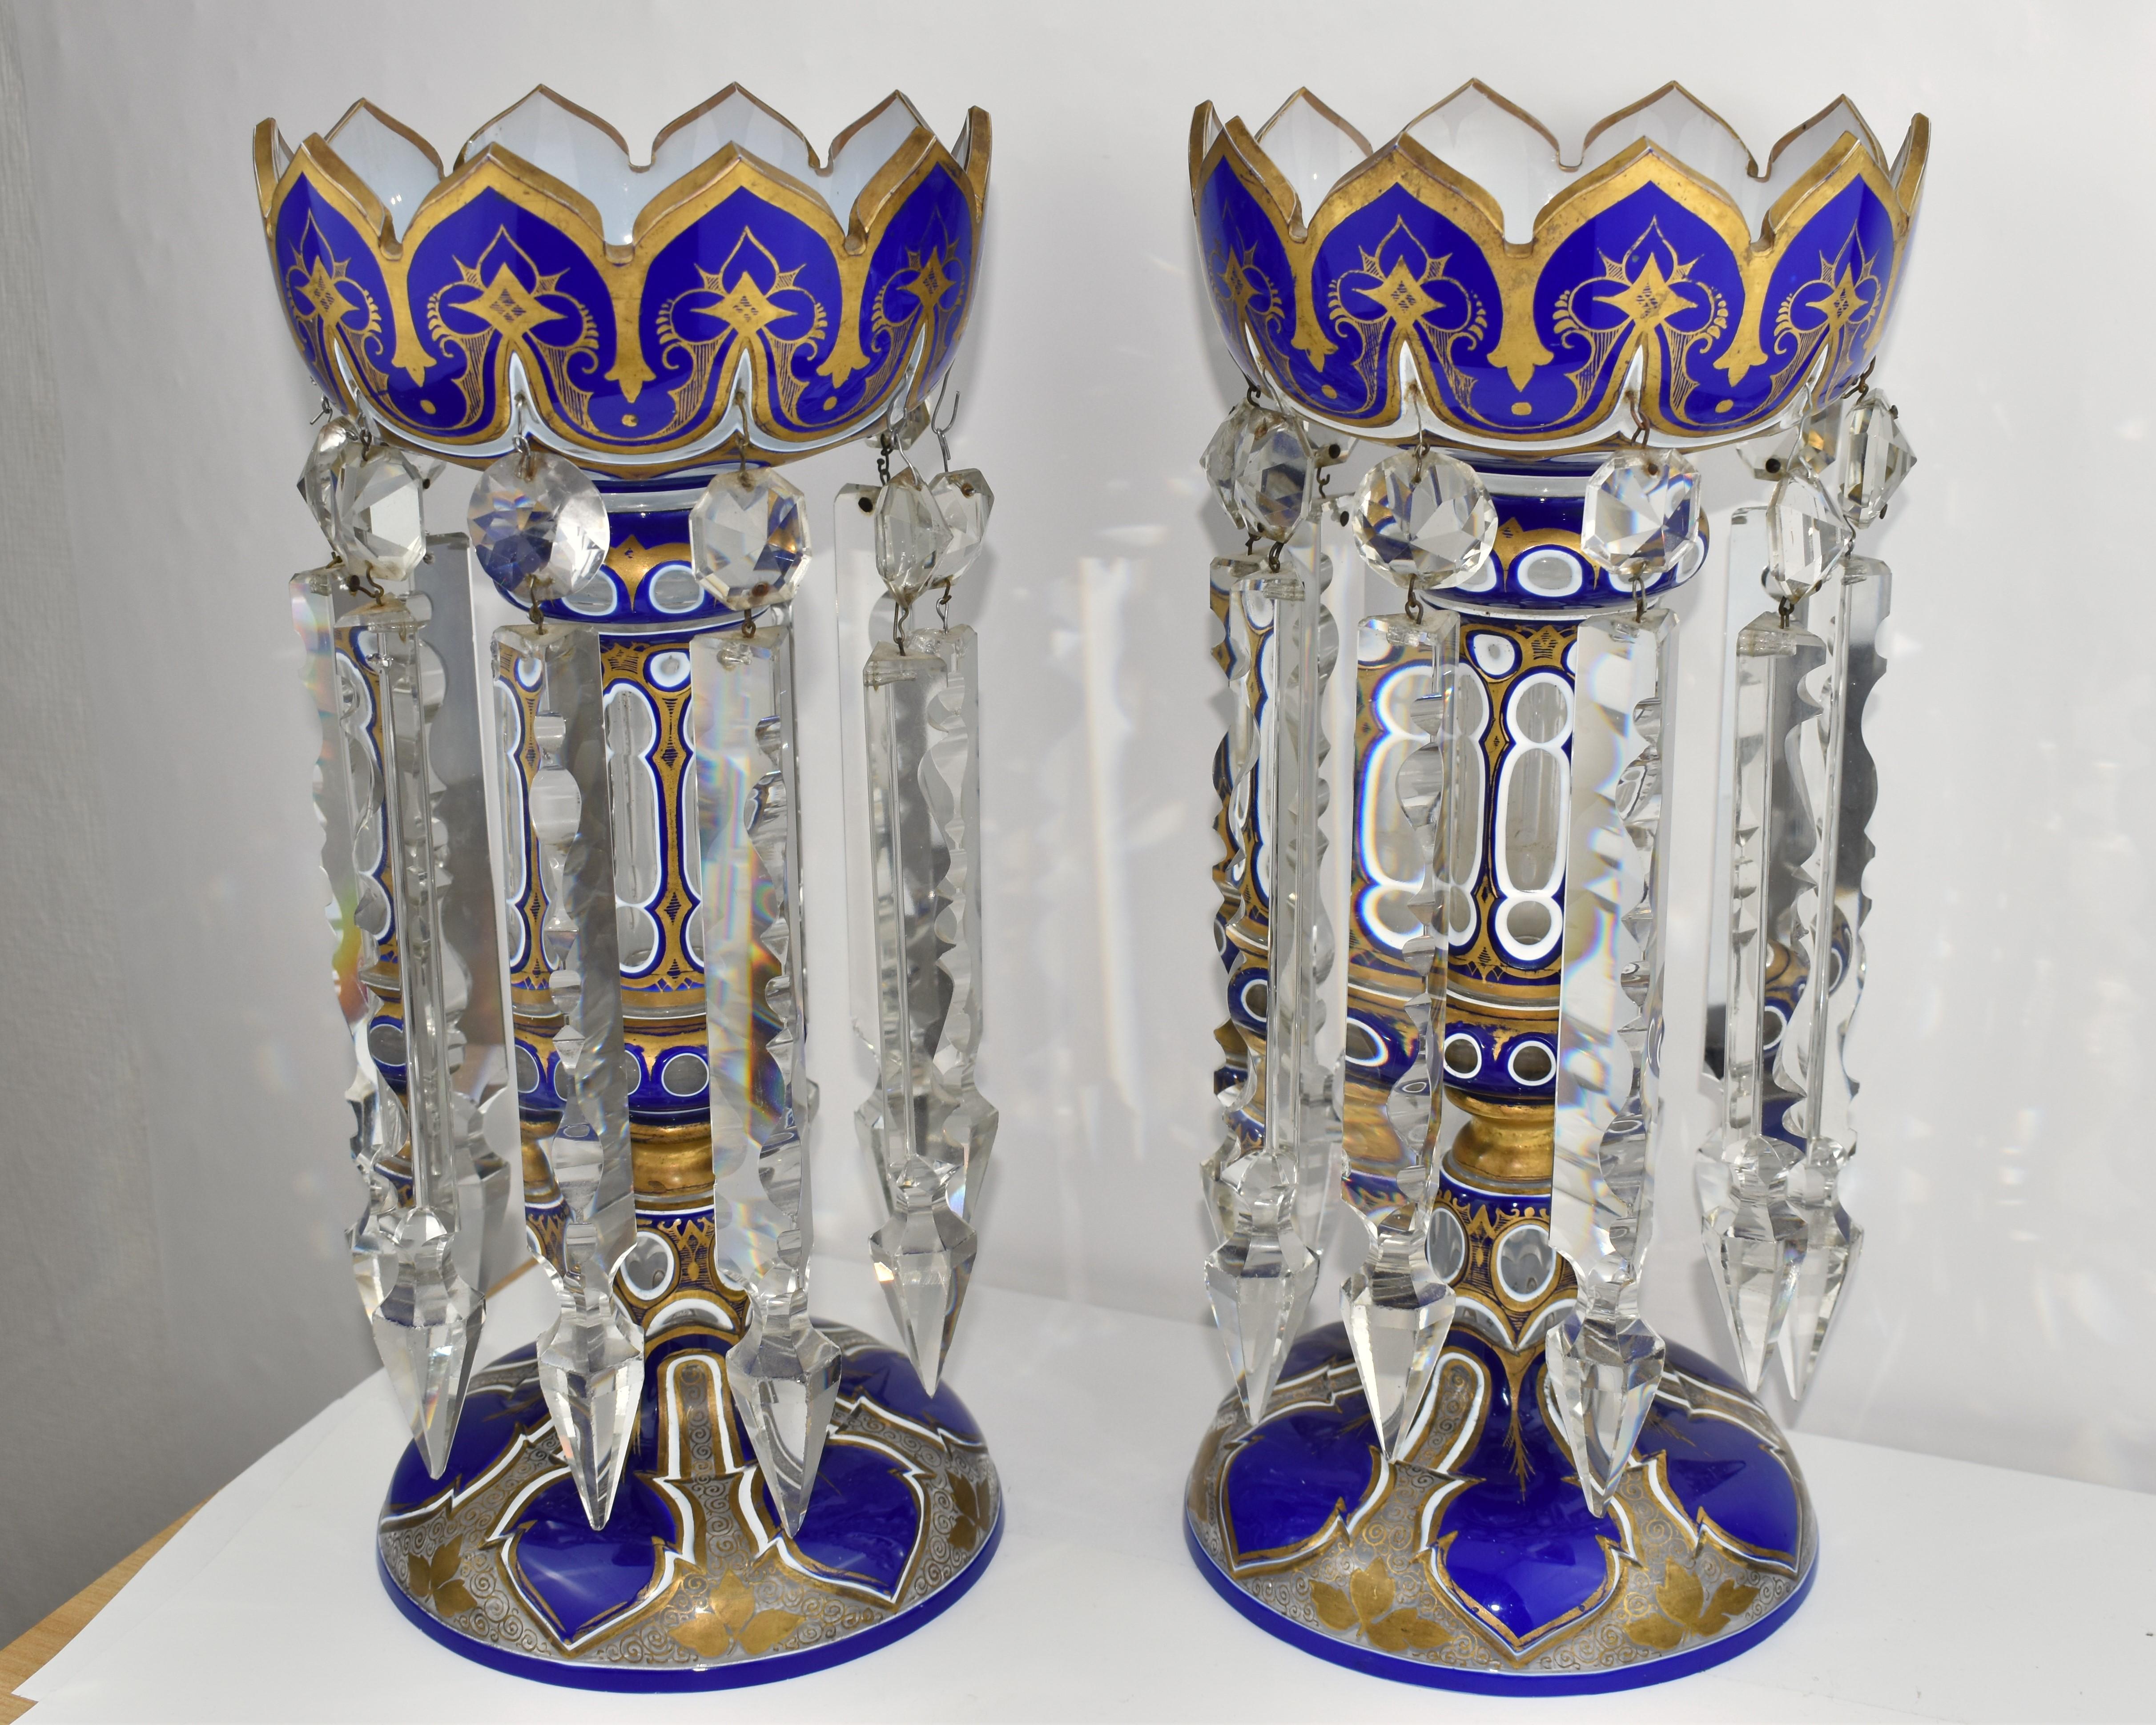 Gilt LARGE PAIR OF ANTIQUE GILDED BOHEMIAN OVERLAY CRYSTAL GLASS LUSTRES, 19th C For Sale